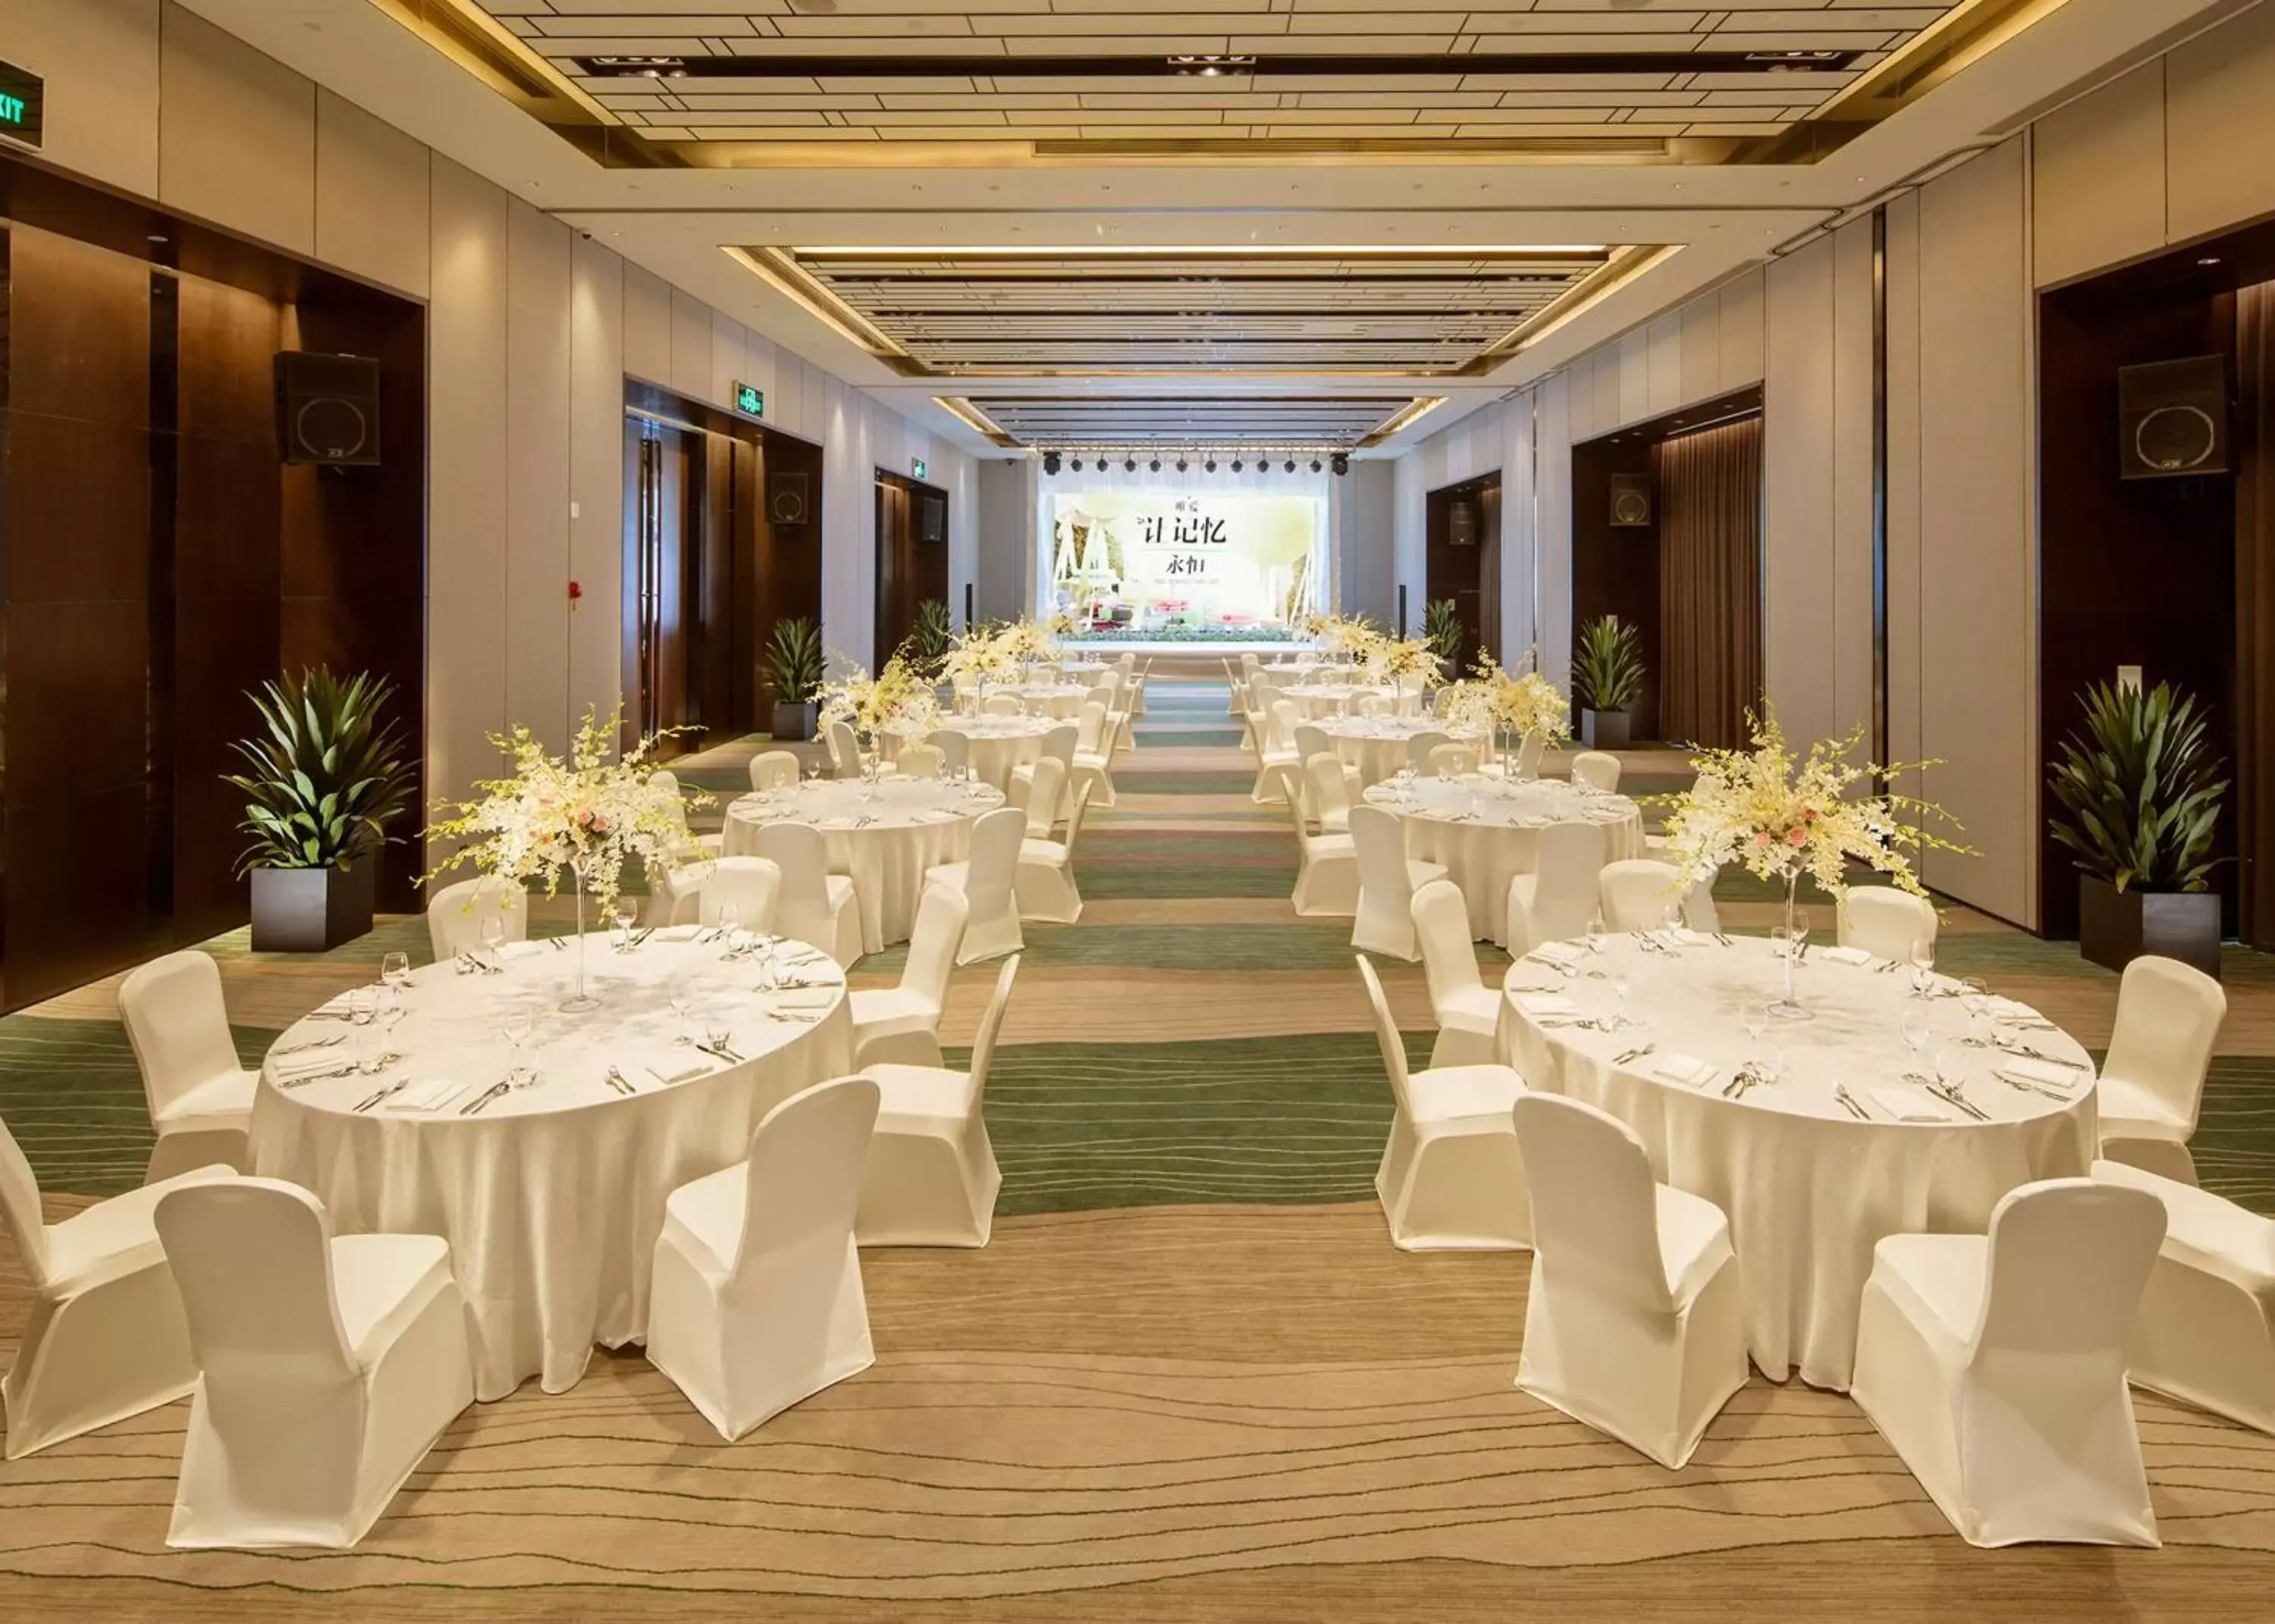 Meeting/conference room, Banquet Facilities in DoubleTree by Hilton Chongqing - Nan'an